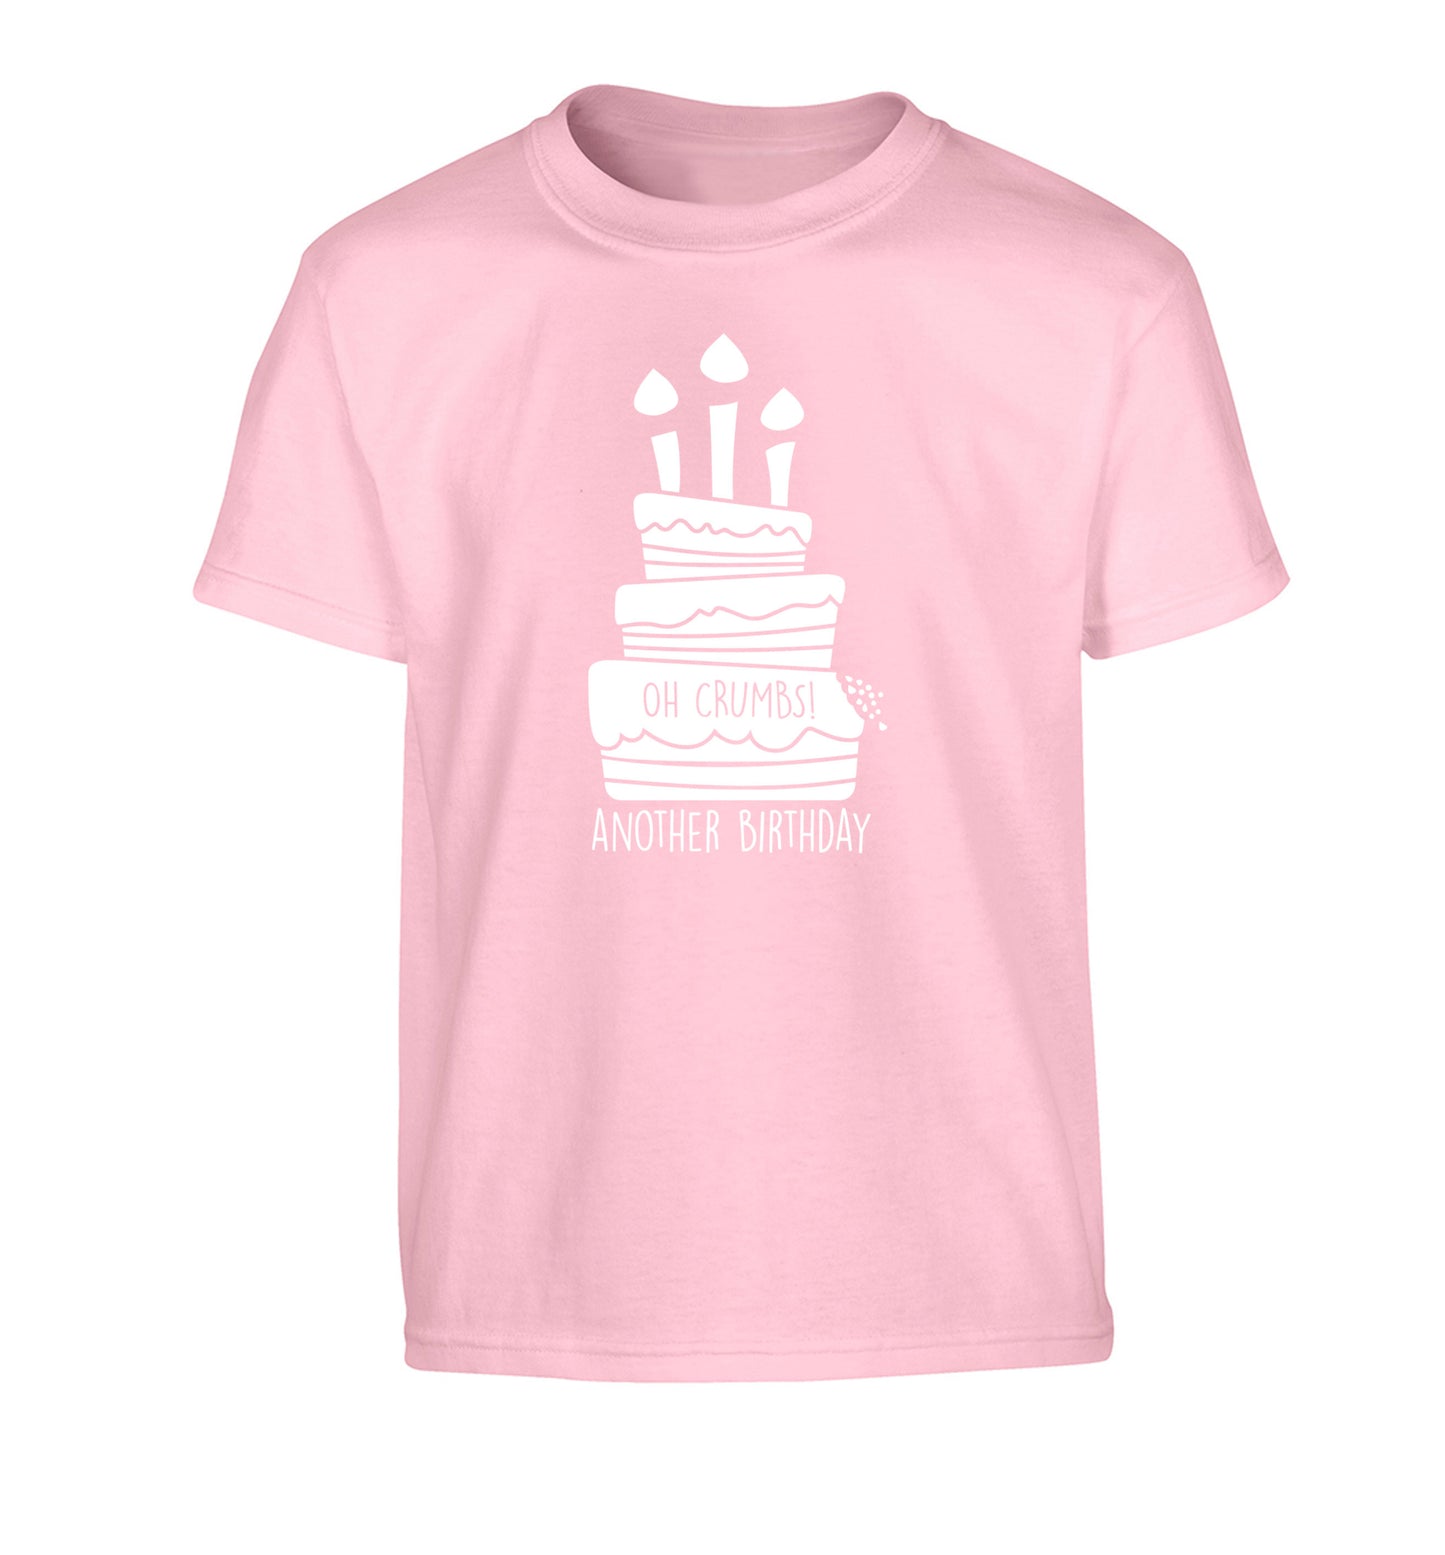 Oh crumbs another birthday! Children's light pink Tshirt 12-14 Years